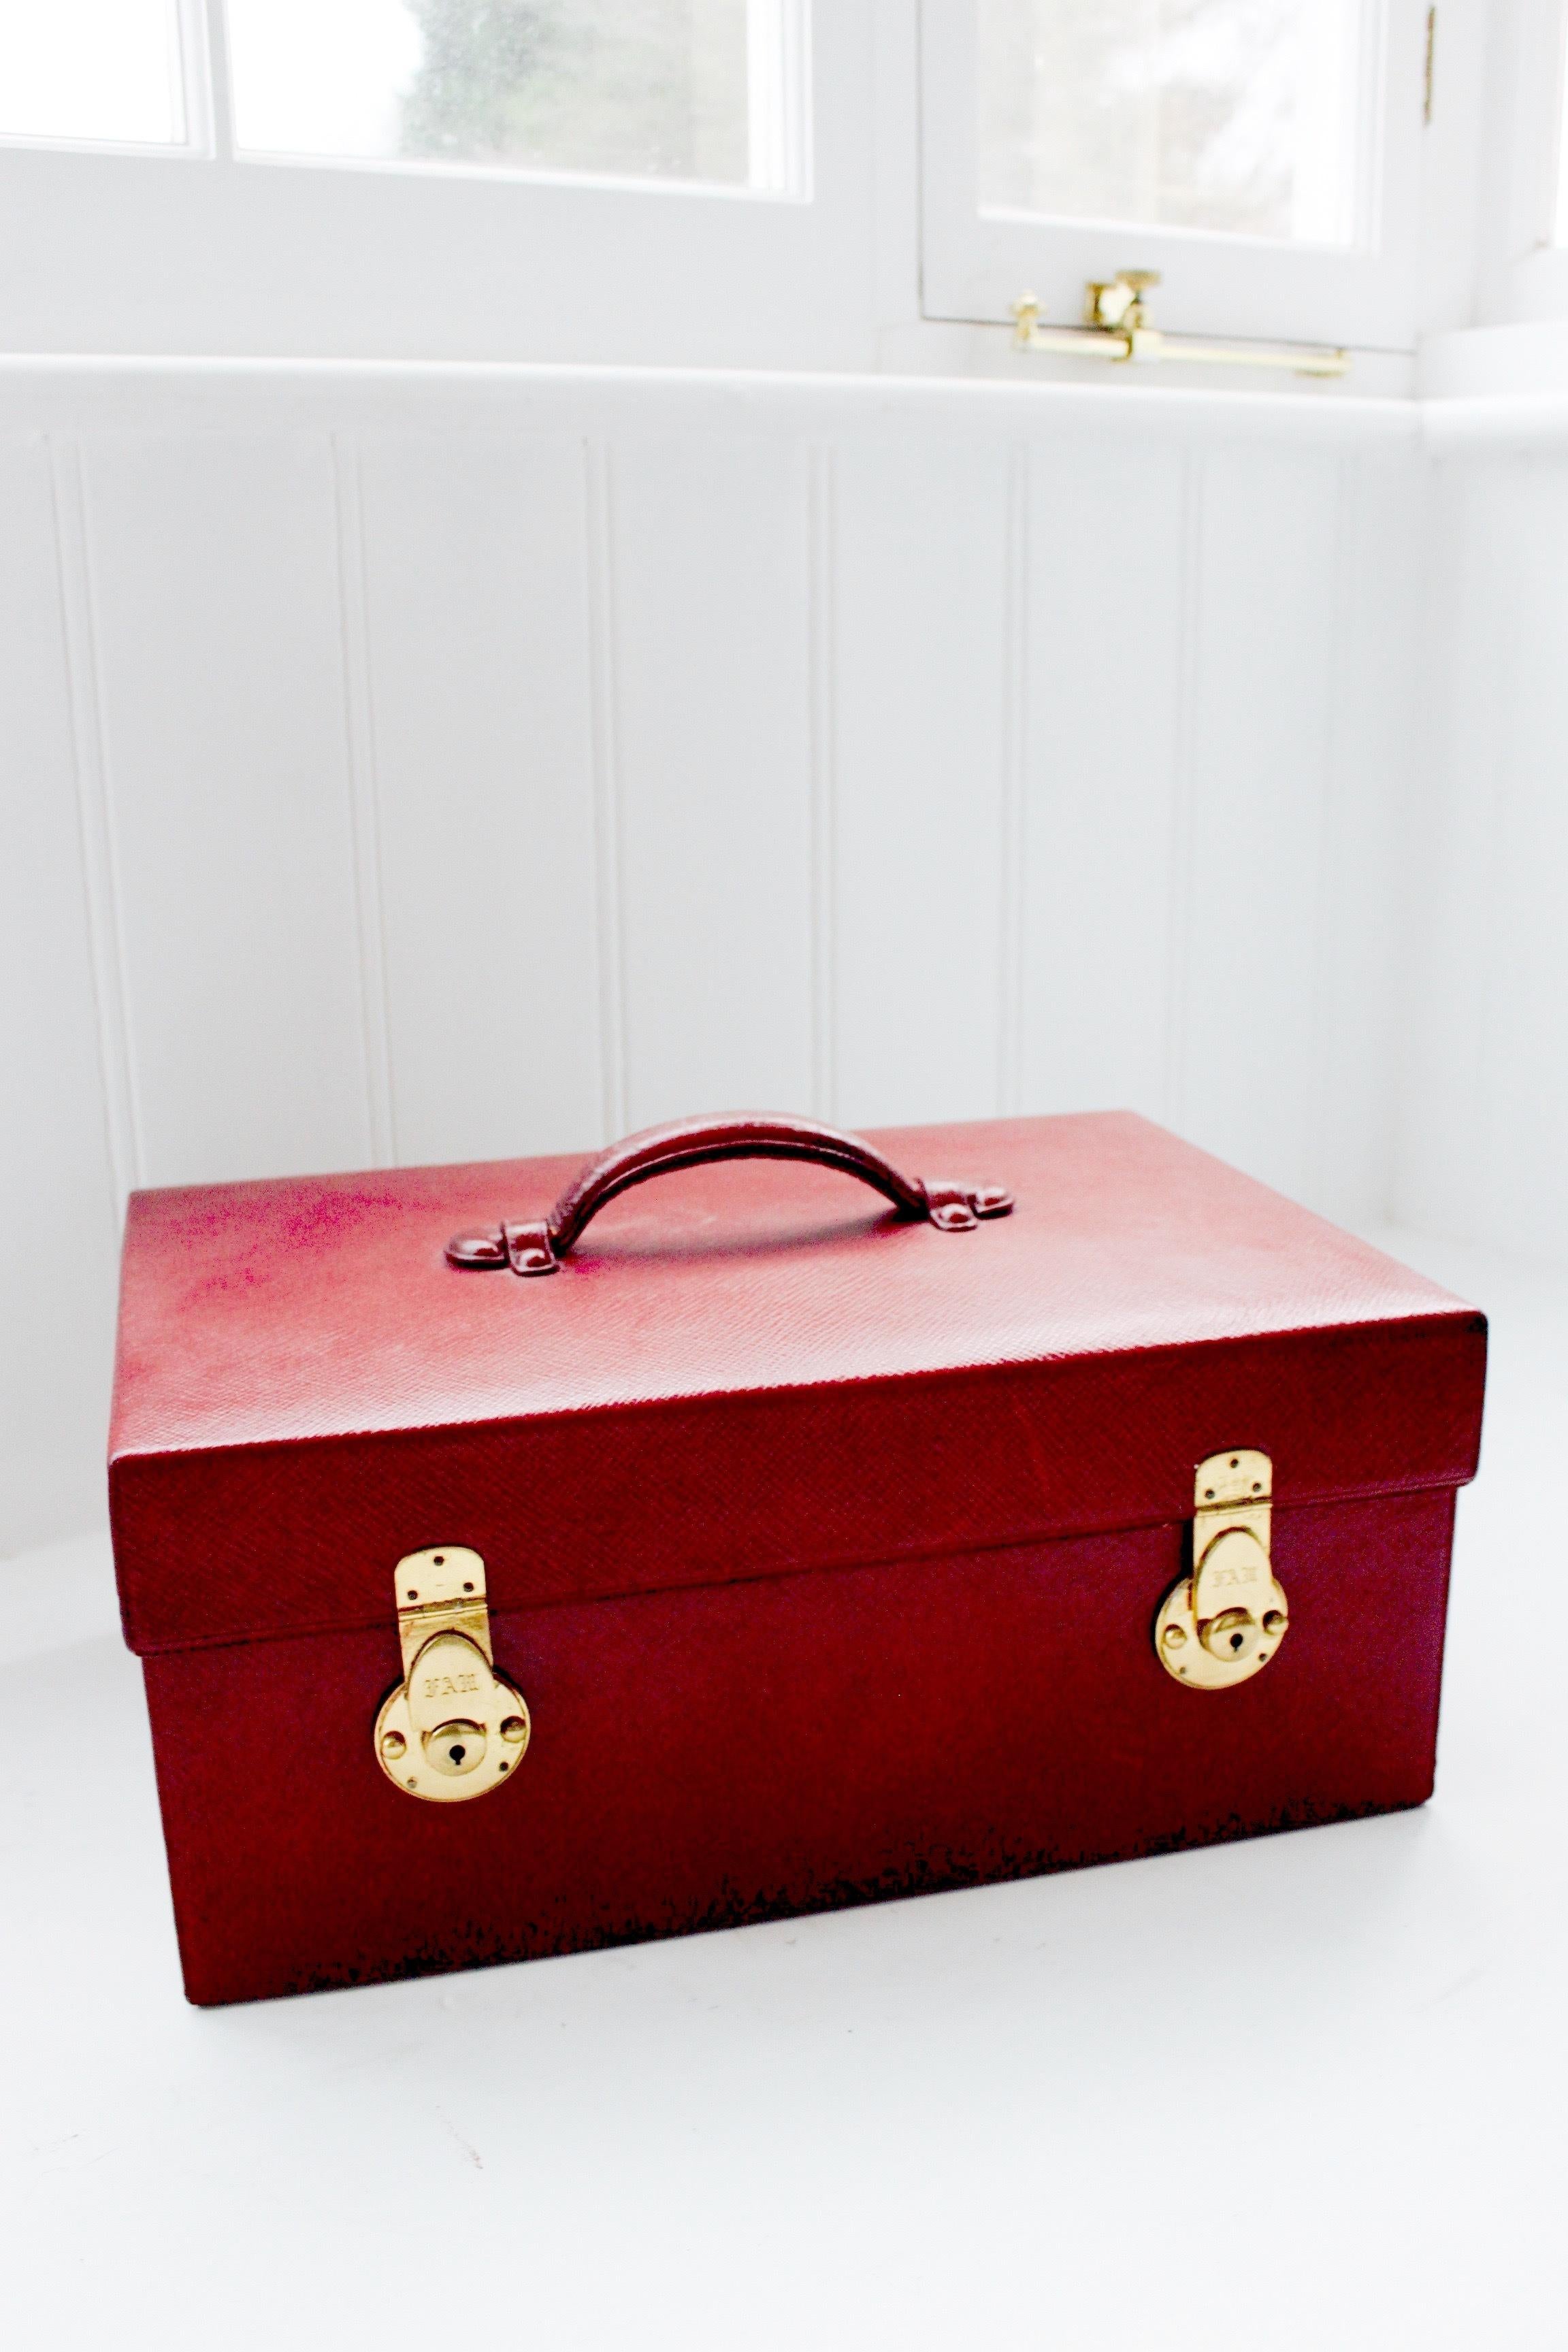 Gustave Keller Leather Jewellery Travel Case, circa 1920 In Good Condition For Sale In Petworth, West Sussex